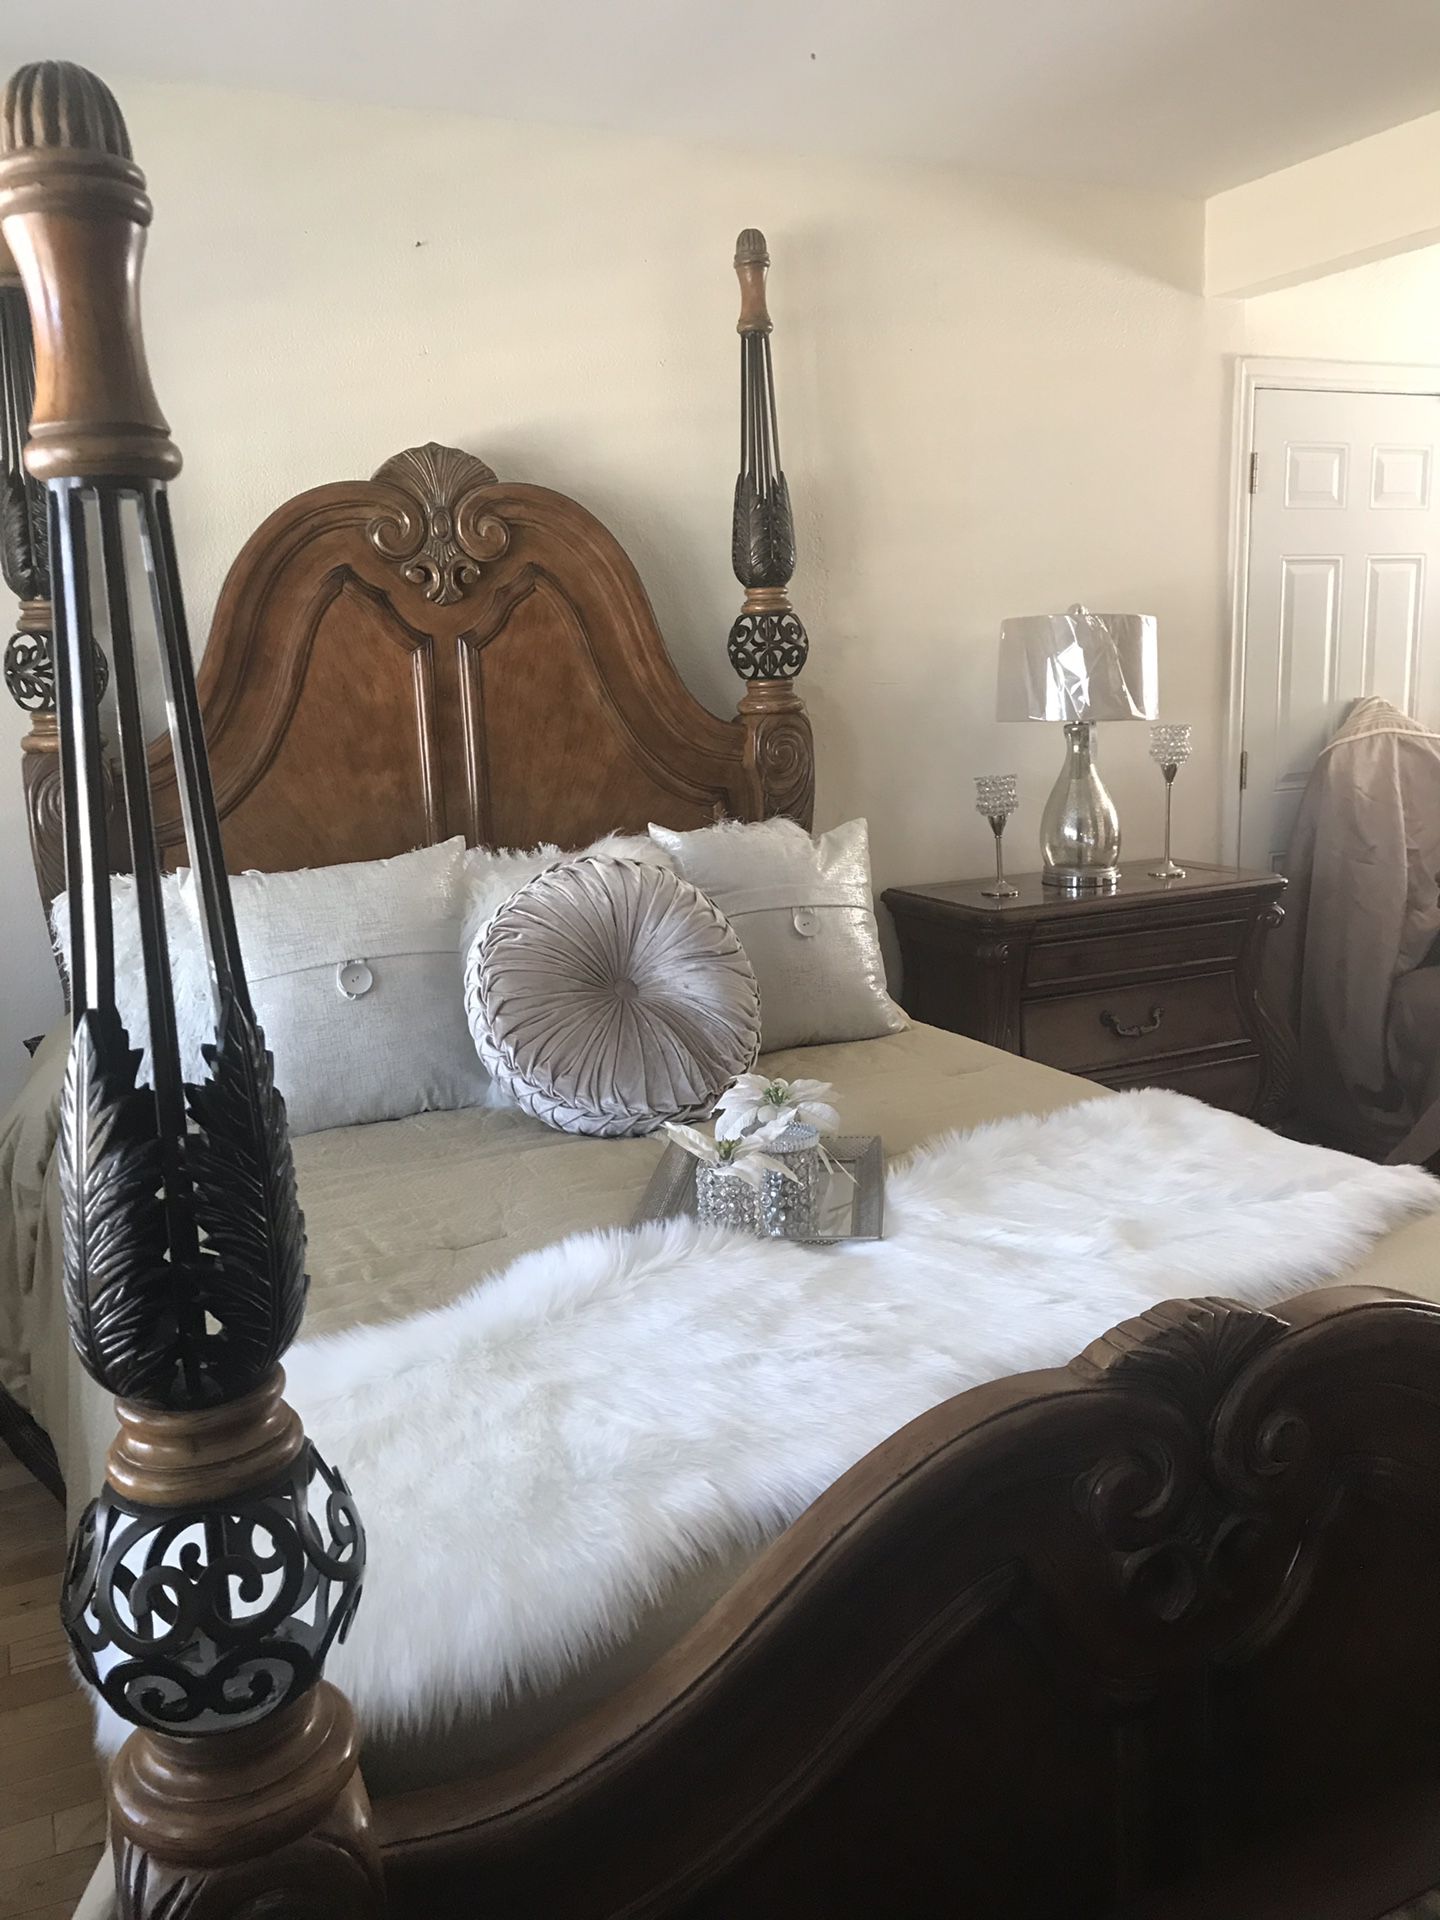 BEDROOM SET QUEEN SIZE MARBLE TOPS AND ARMOIRE